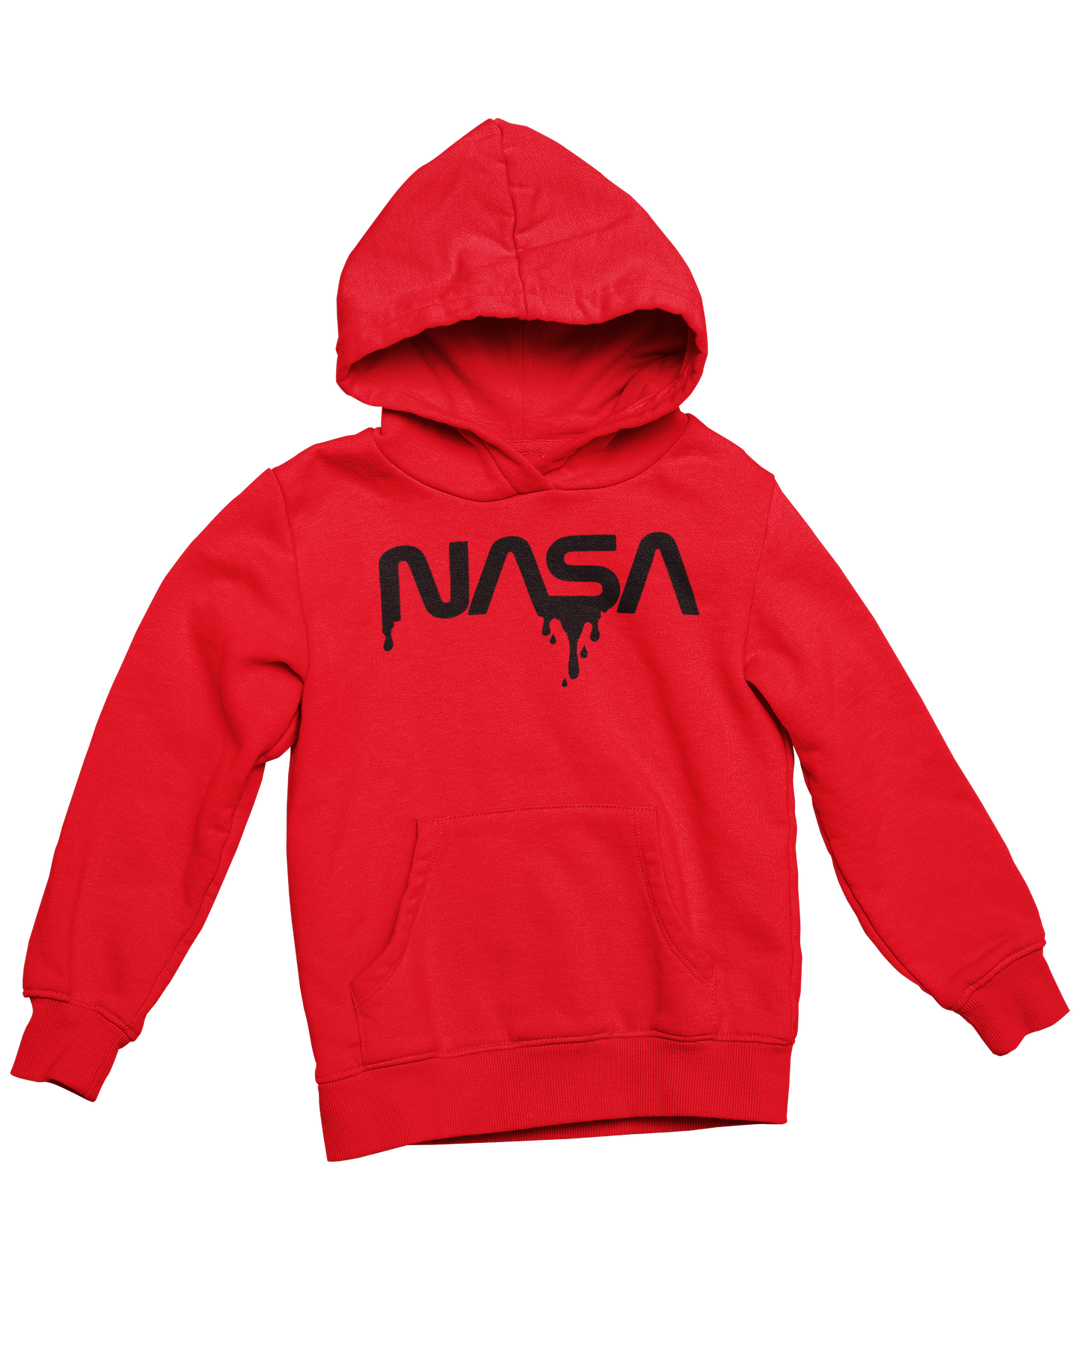 NASA Dripped Cotton Blend Hoodie Hoodie Red/Black / Small - From Black Hole Gifts - The #1 Nasa Store In The Galaxy For NASA Hoodies | Nasa Shirts | Nasa Merch | And Science Gifts